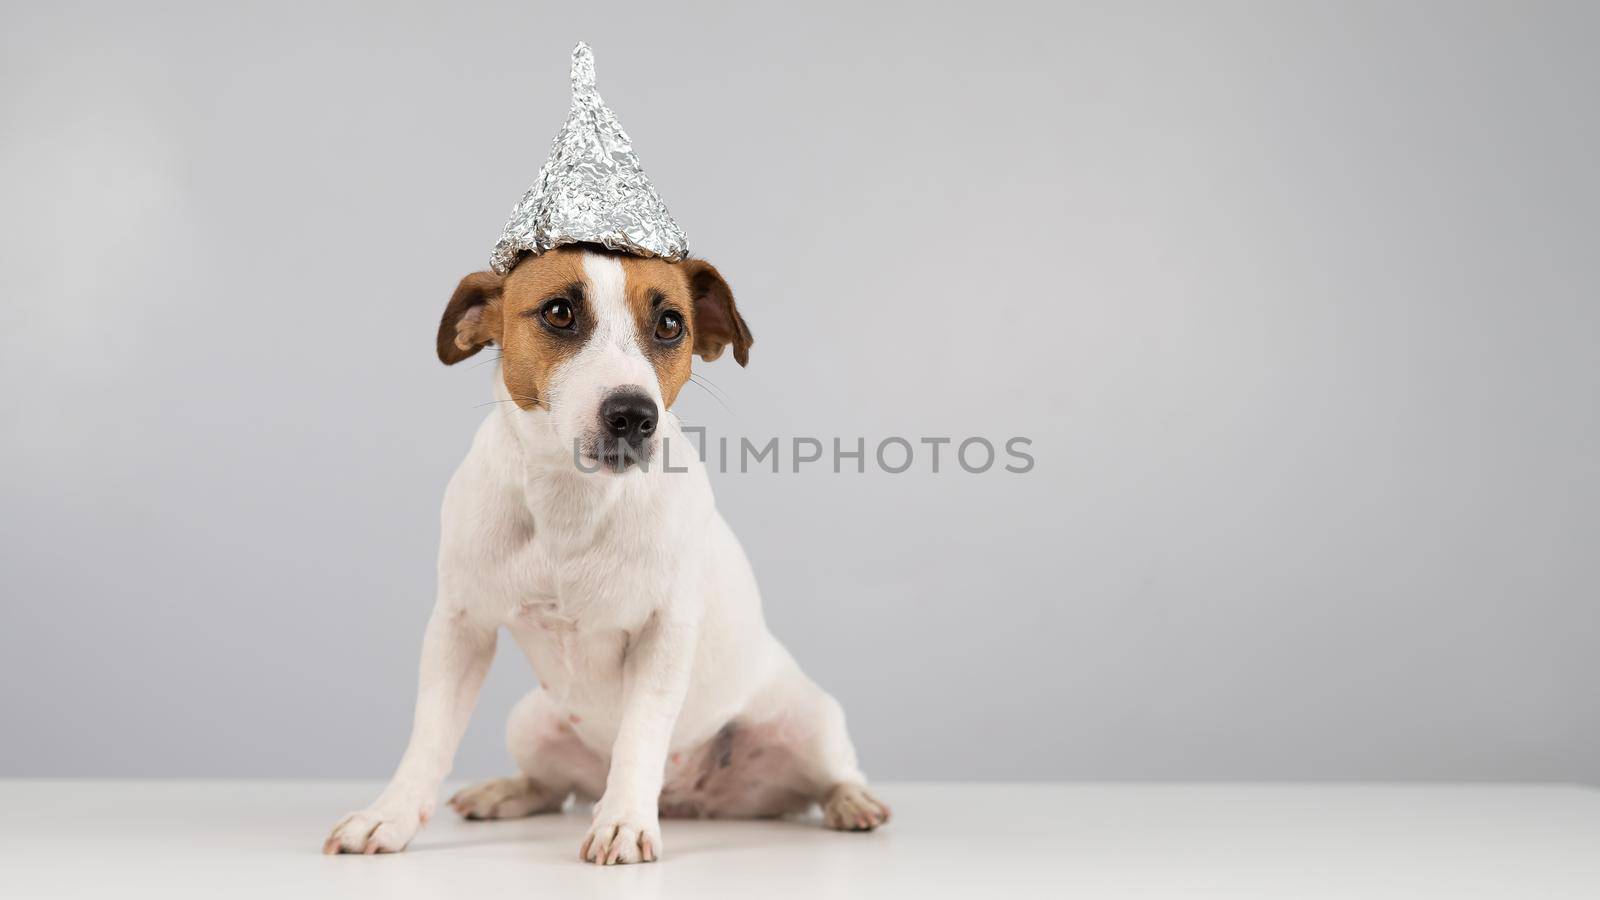 Portrait of a Jack Russell Terrier dog in a tinfoil hat on a white background